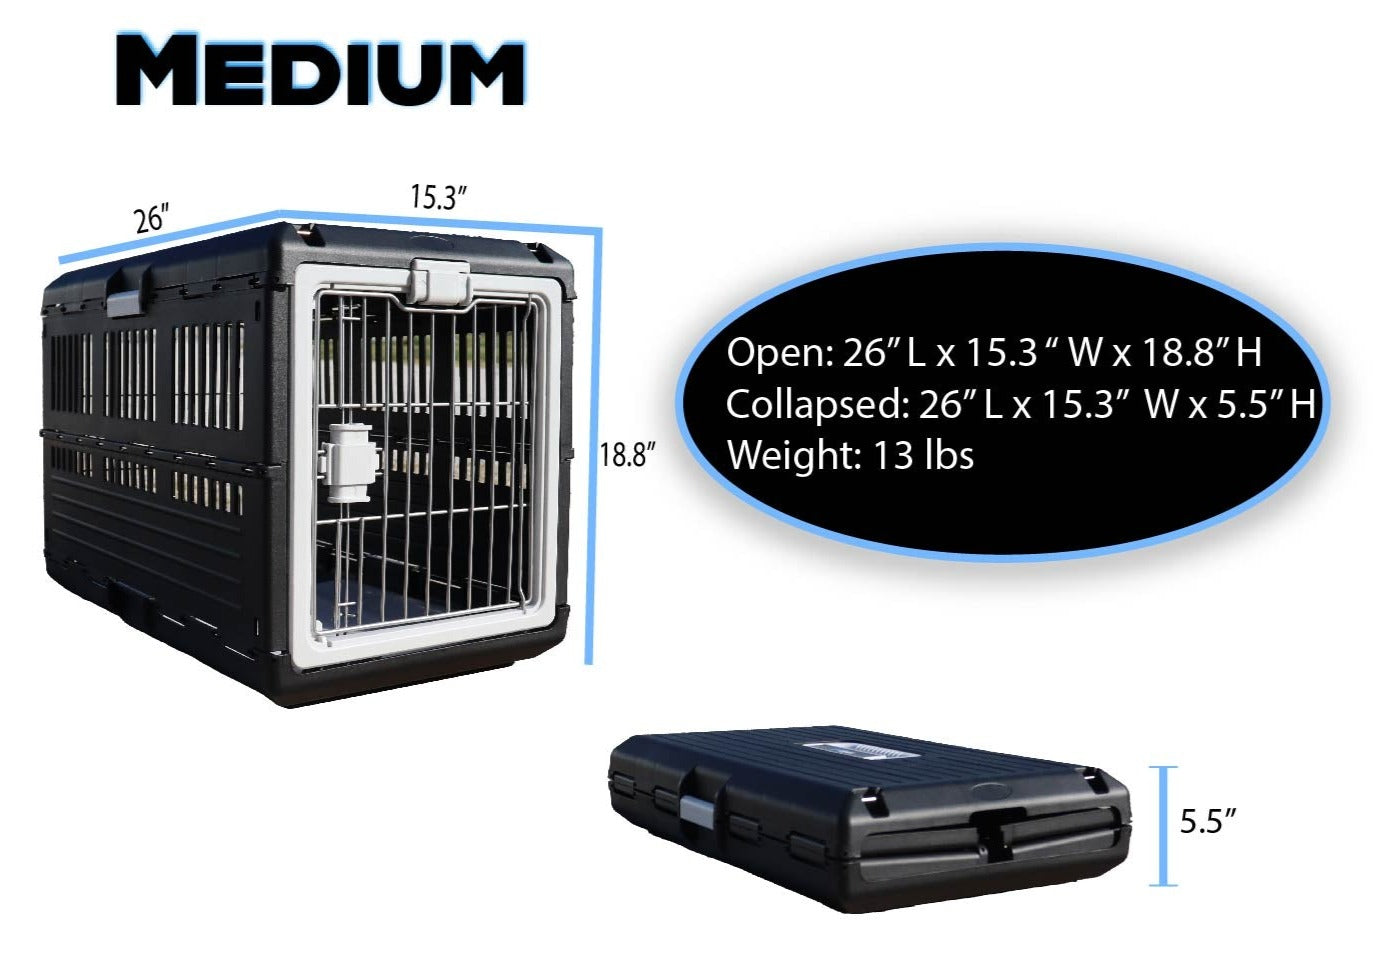 A photo of the Mirapet Medium Collapsible pet crate standing, and also closed with measurements around the sides. A black oval with white text that says "Open: 26" L x 15.3" W x 18.8"H Collapsed: 26"L x 15.3"W x5.5"H Weight: 13lbs